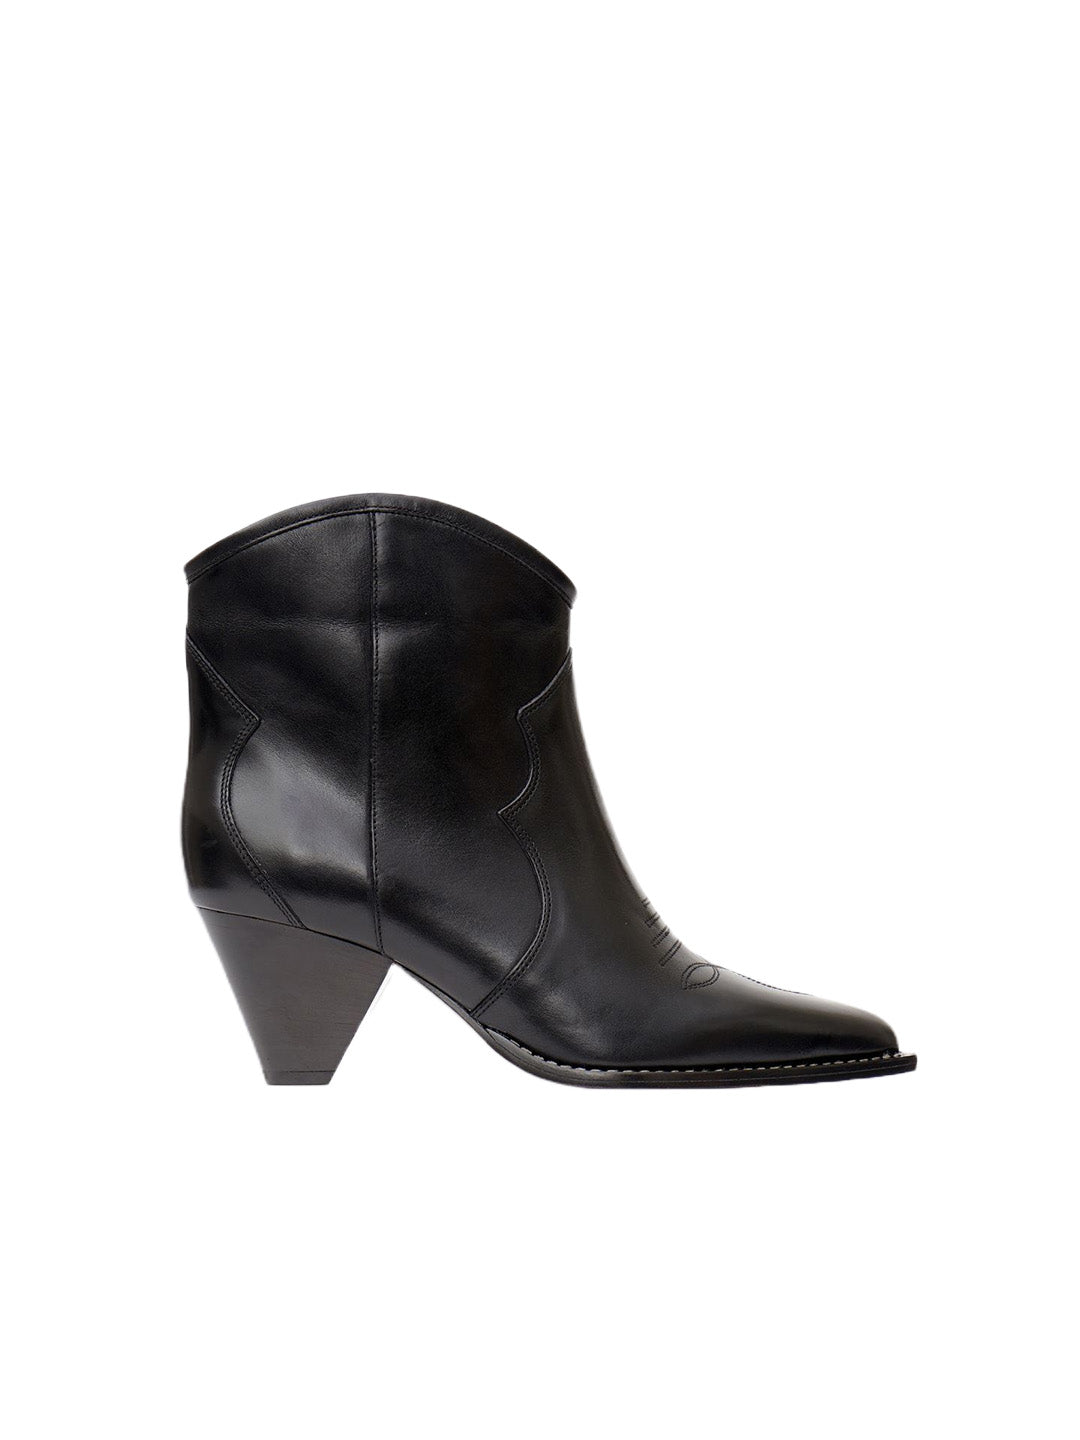 Darizo Leather Ankle Boots in Black